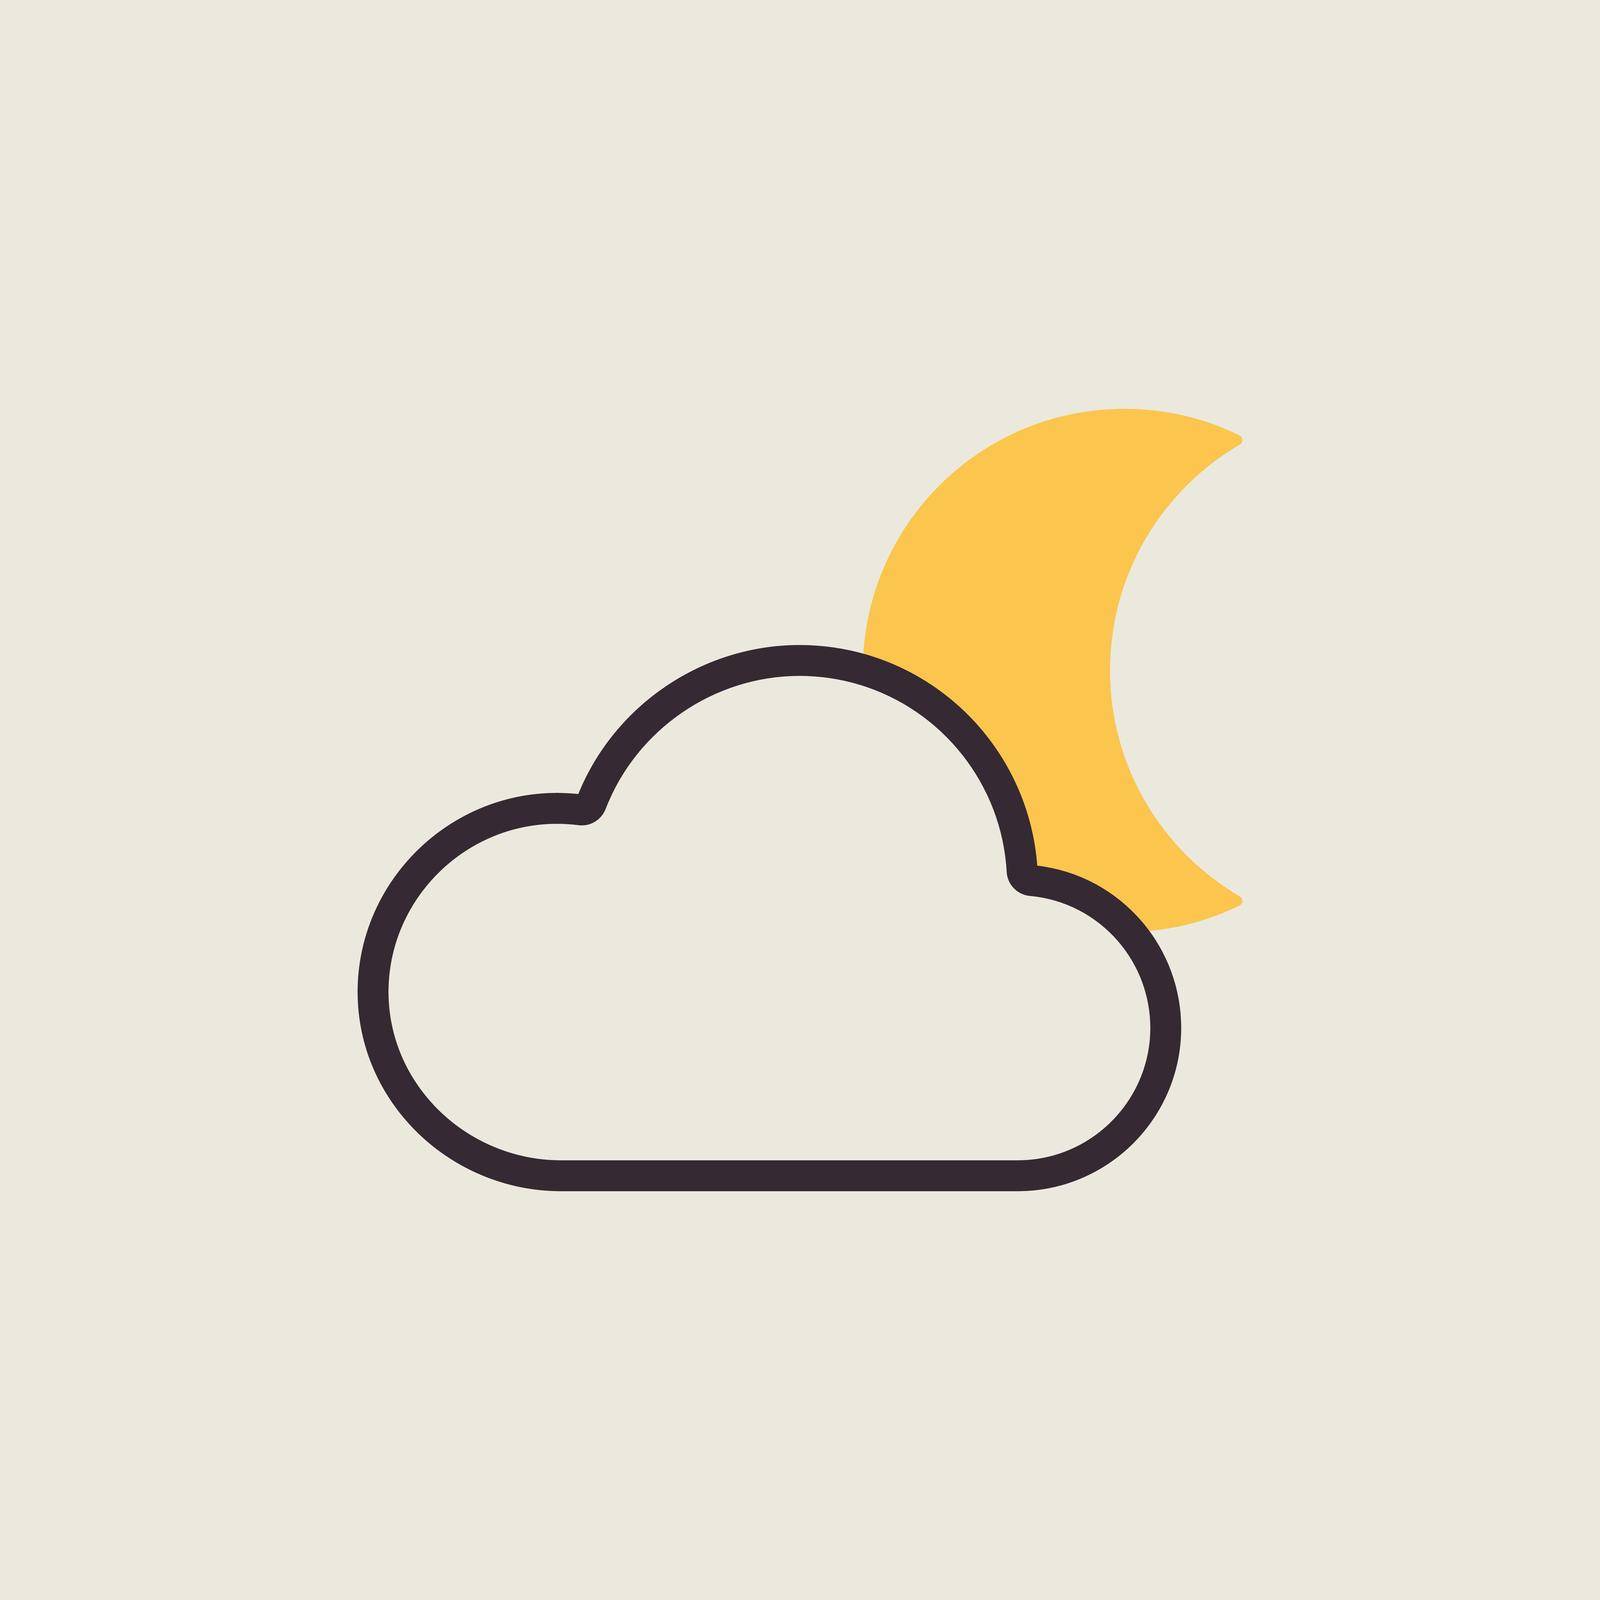 Moon and clouds vector icon. Weather sign by nosik